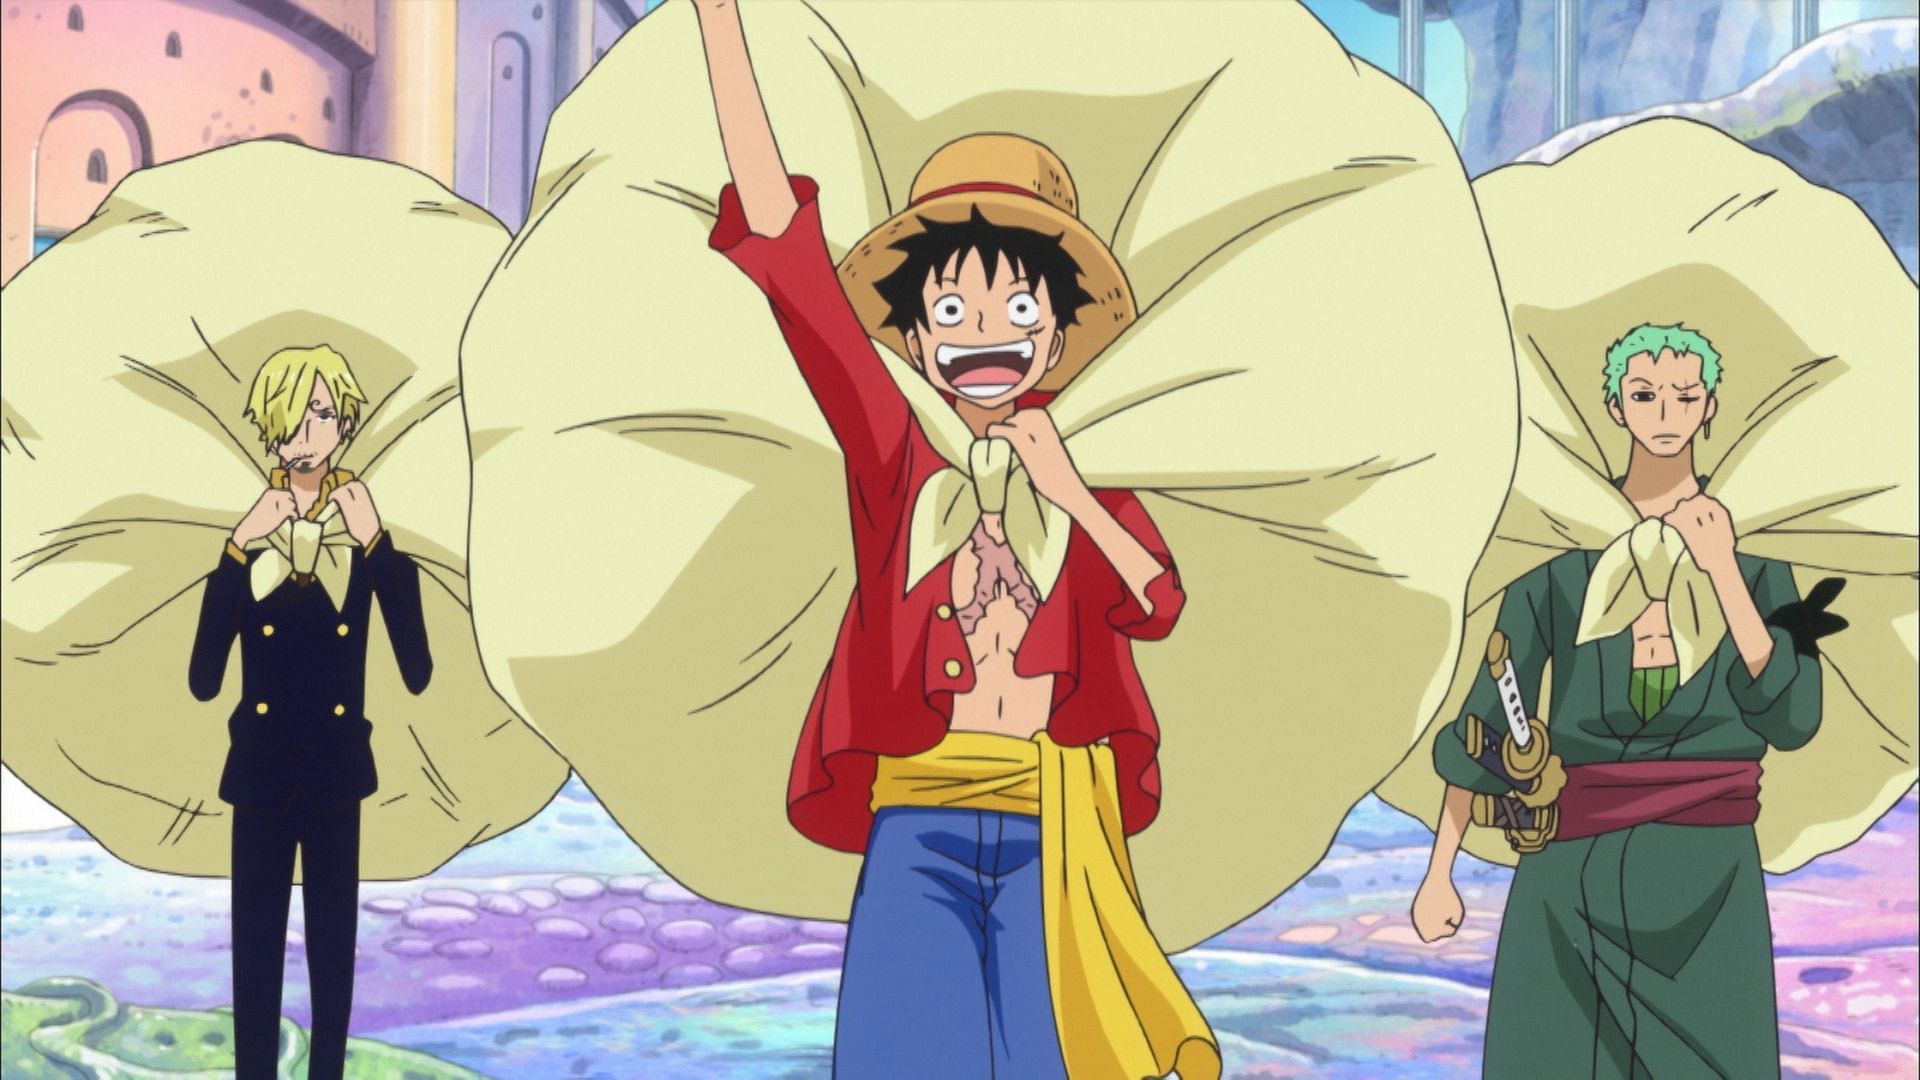 Luffy is wiser than he may seem (Image via Toei Animation)